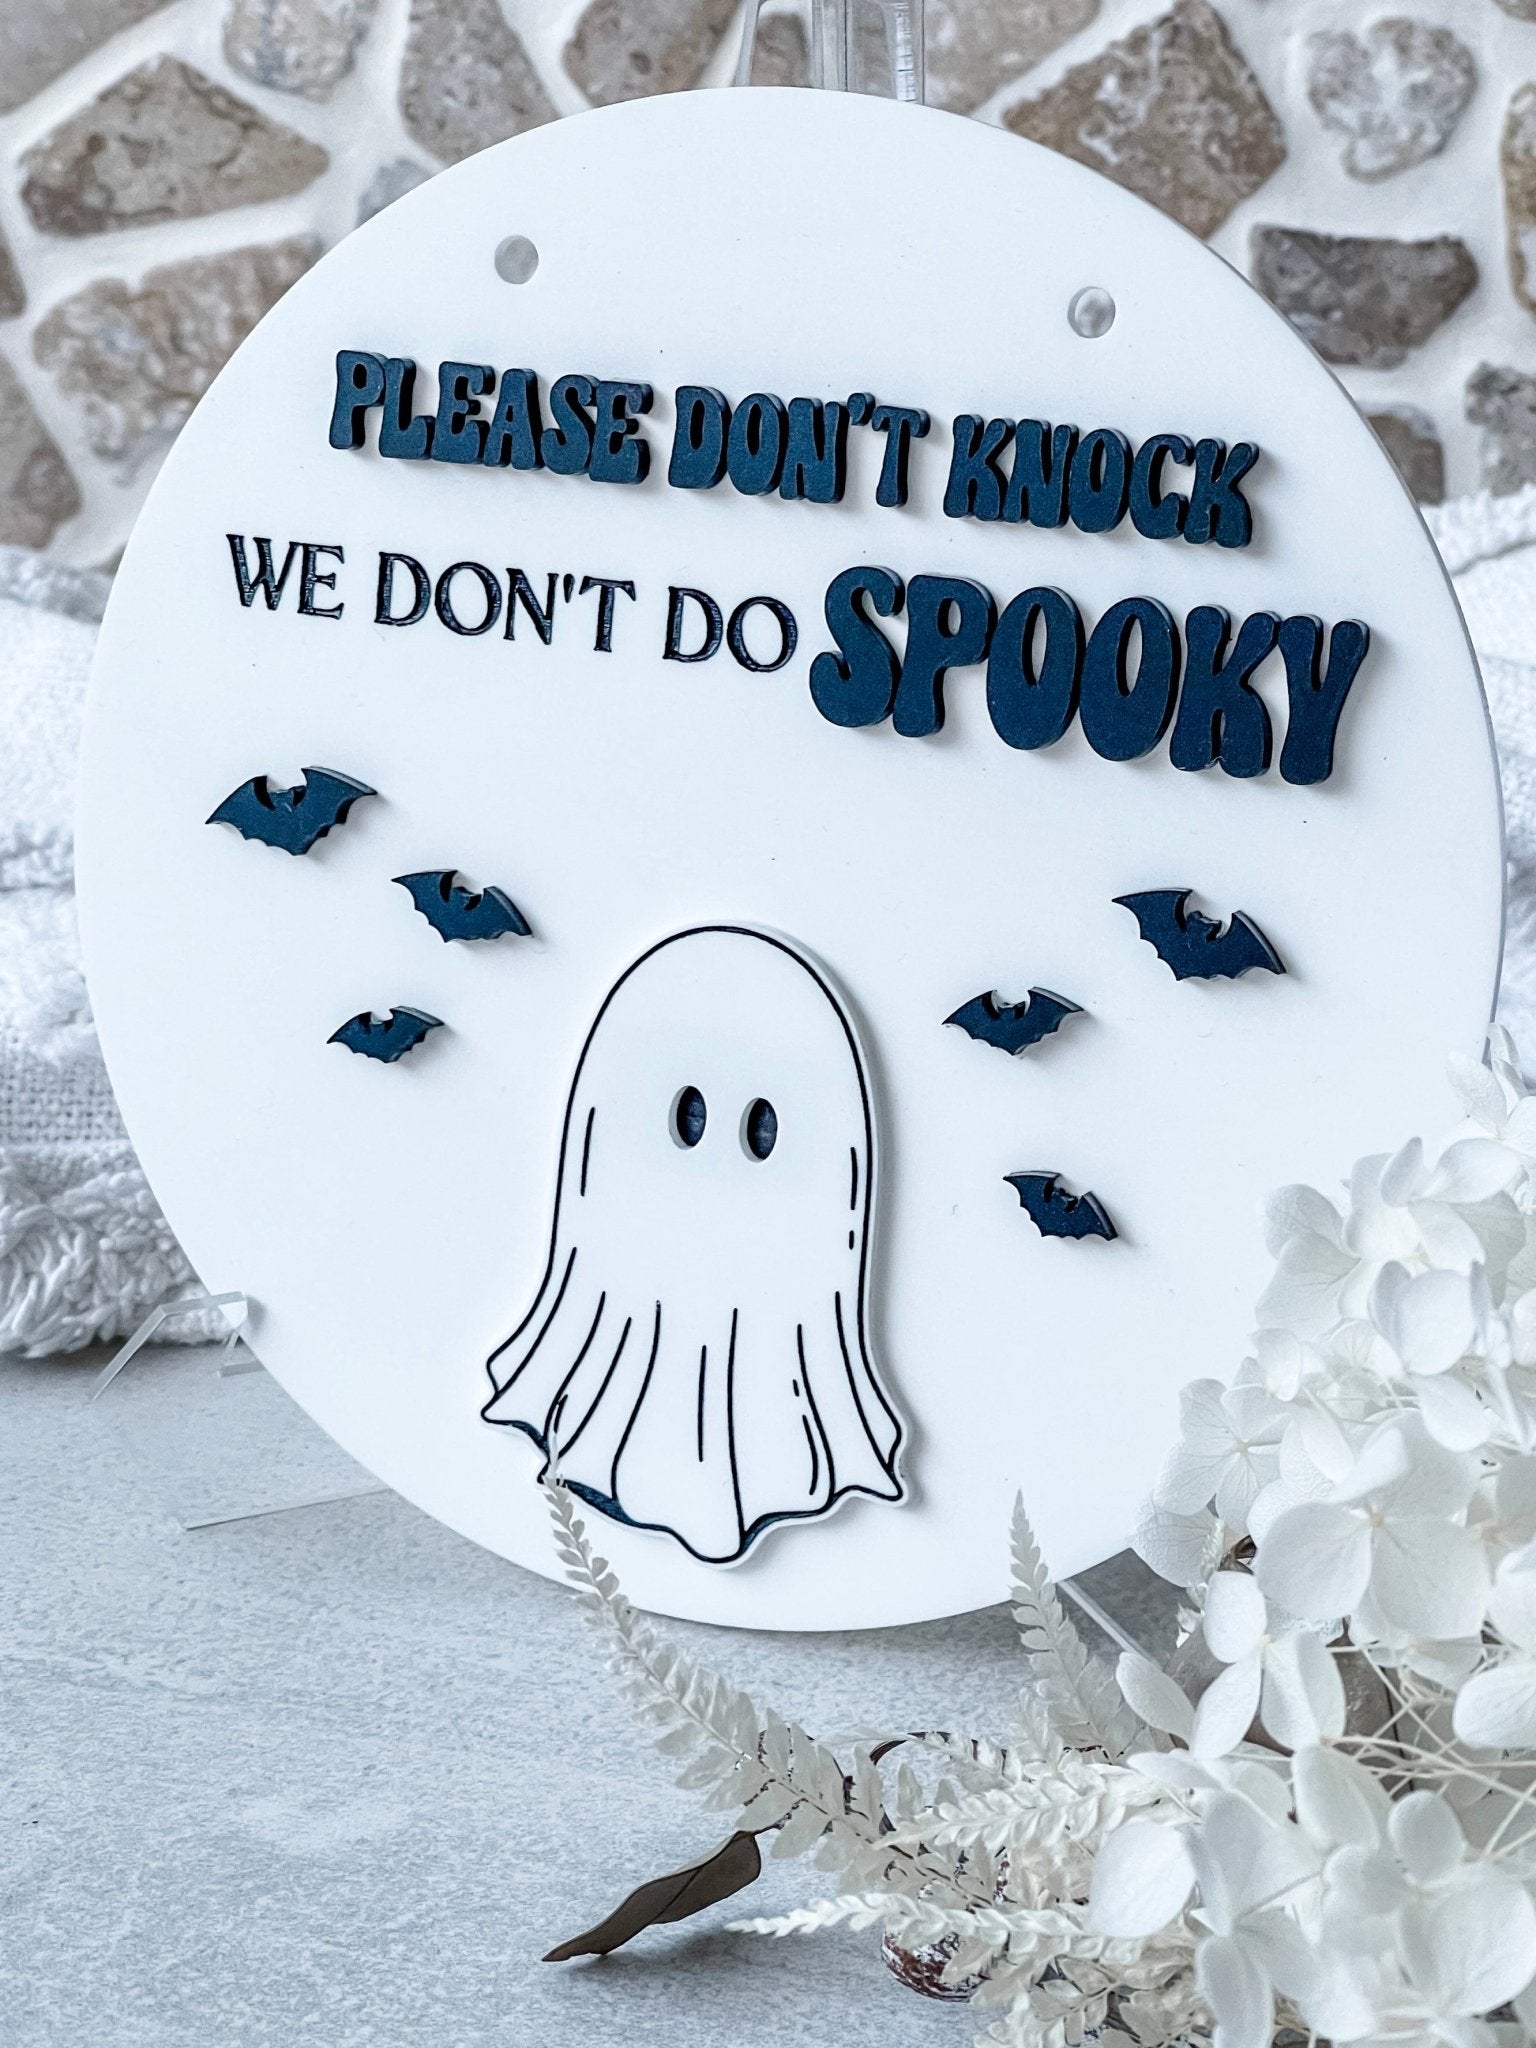 Halloween Door Sign - We Don't Do Spooky - The Humble Gift Co.